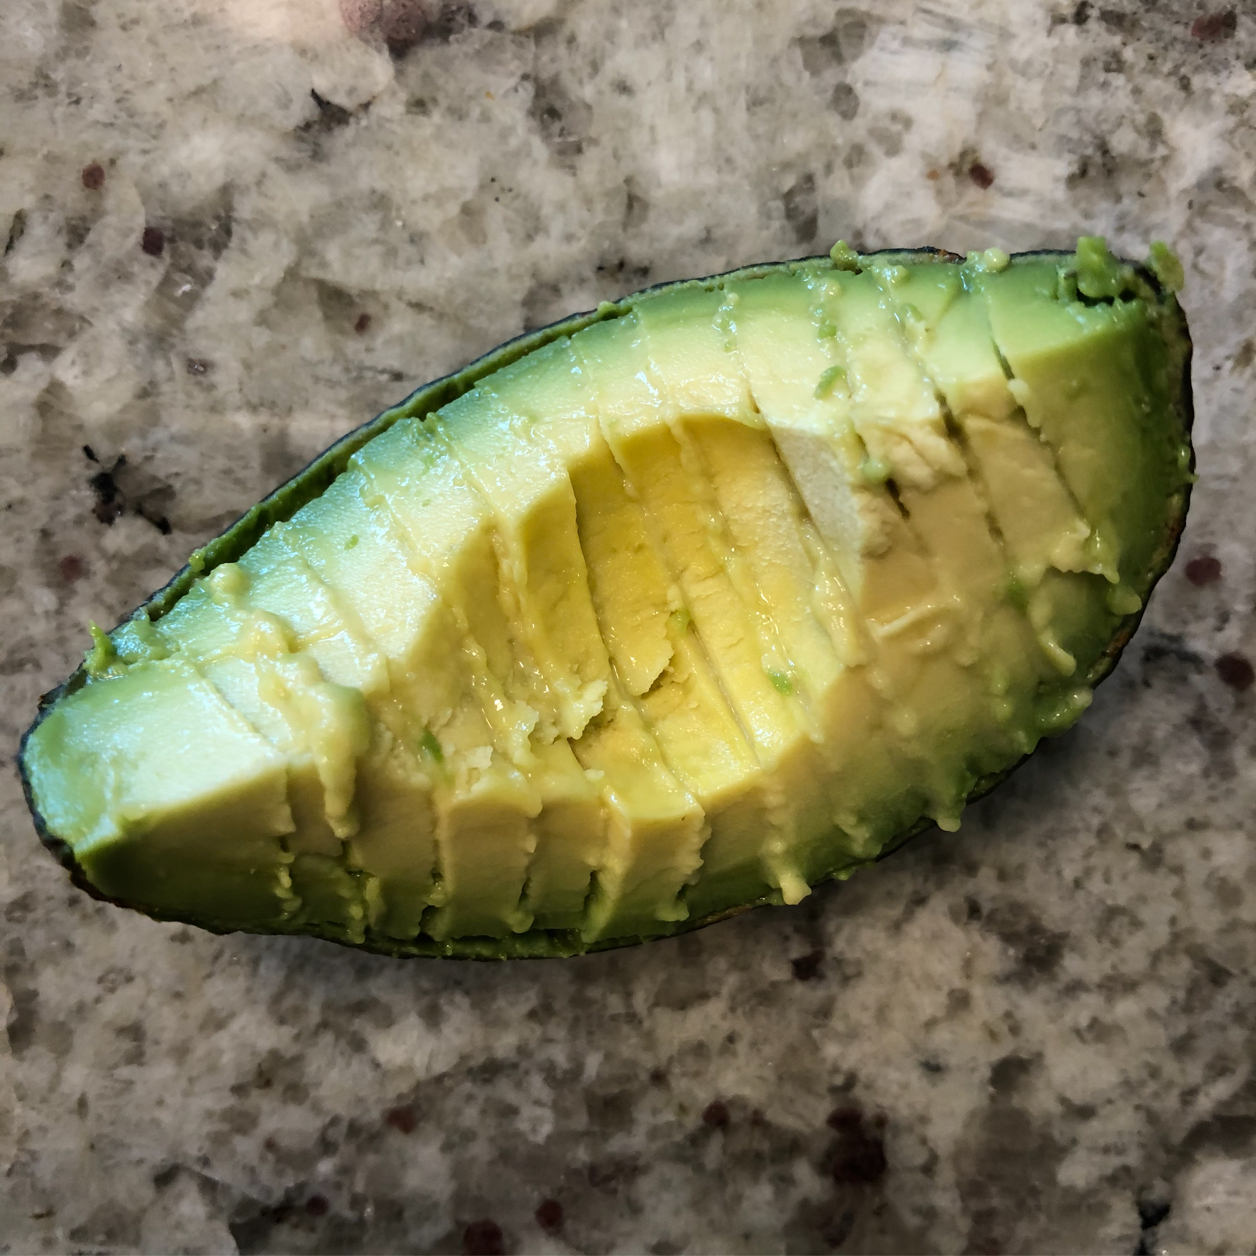 Closeup of a quarter section of avocado, pitted and sliced